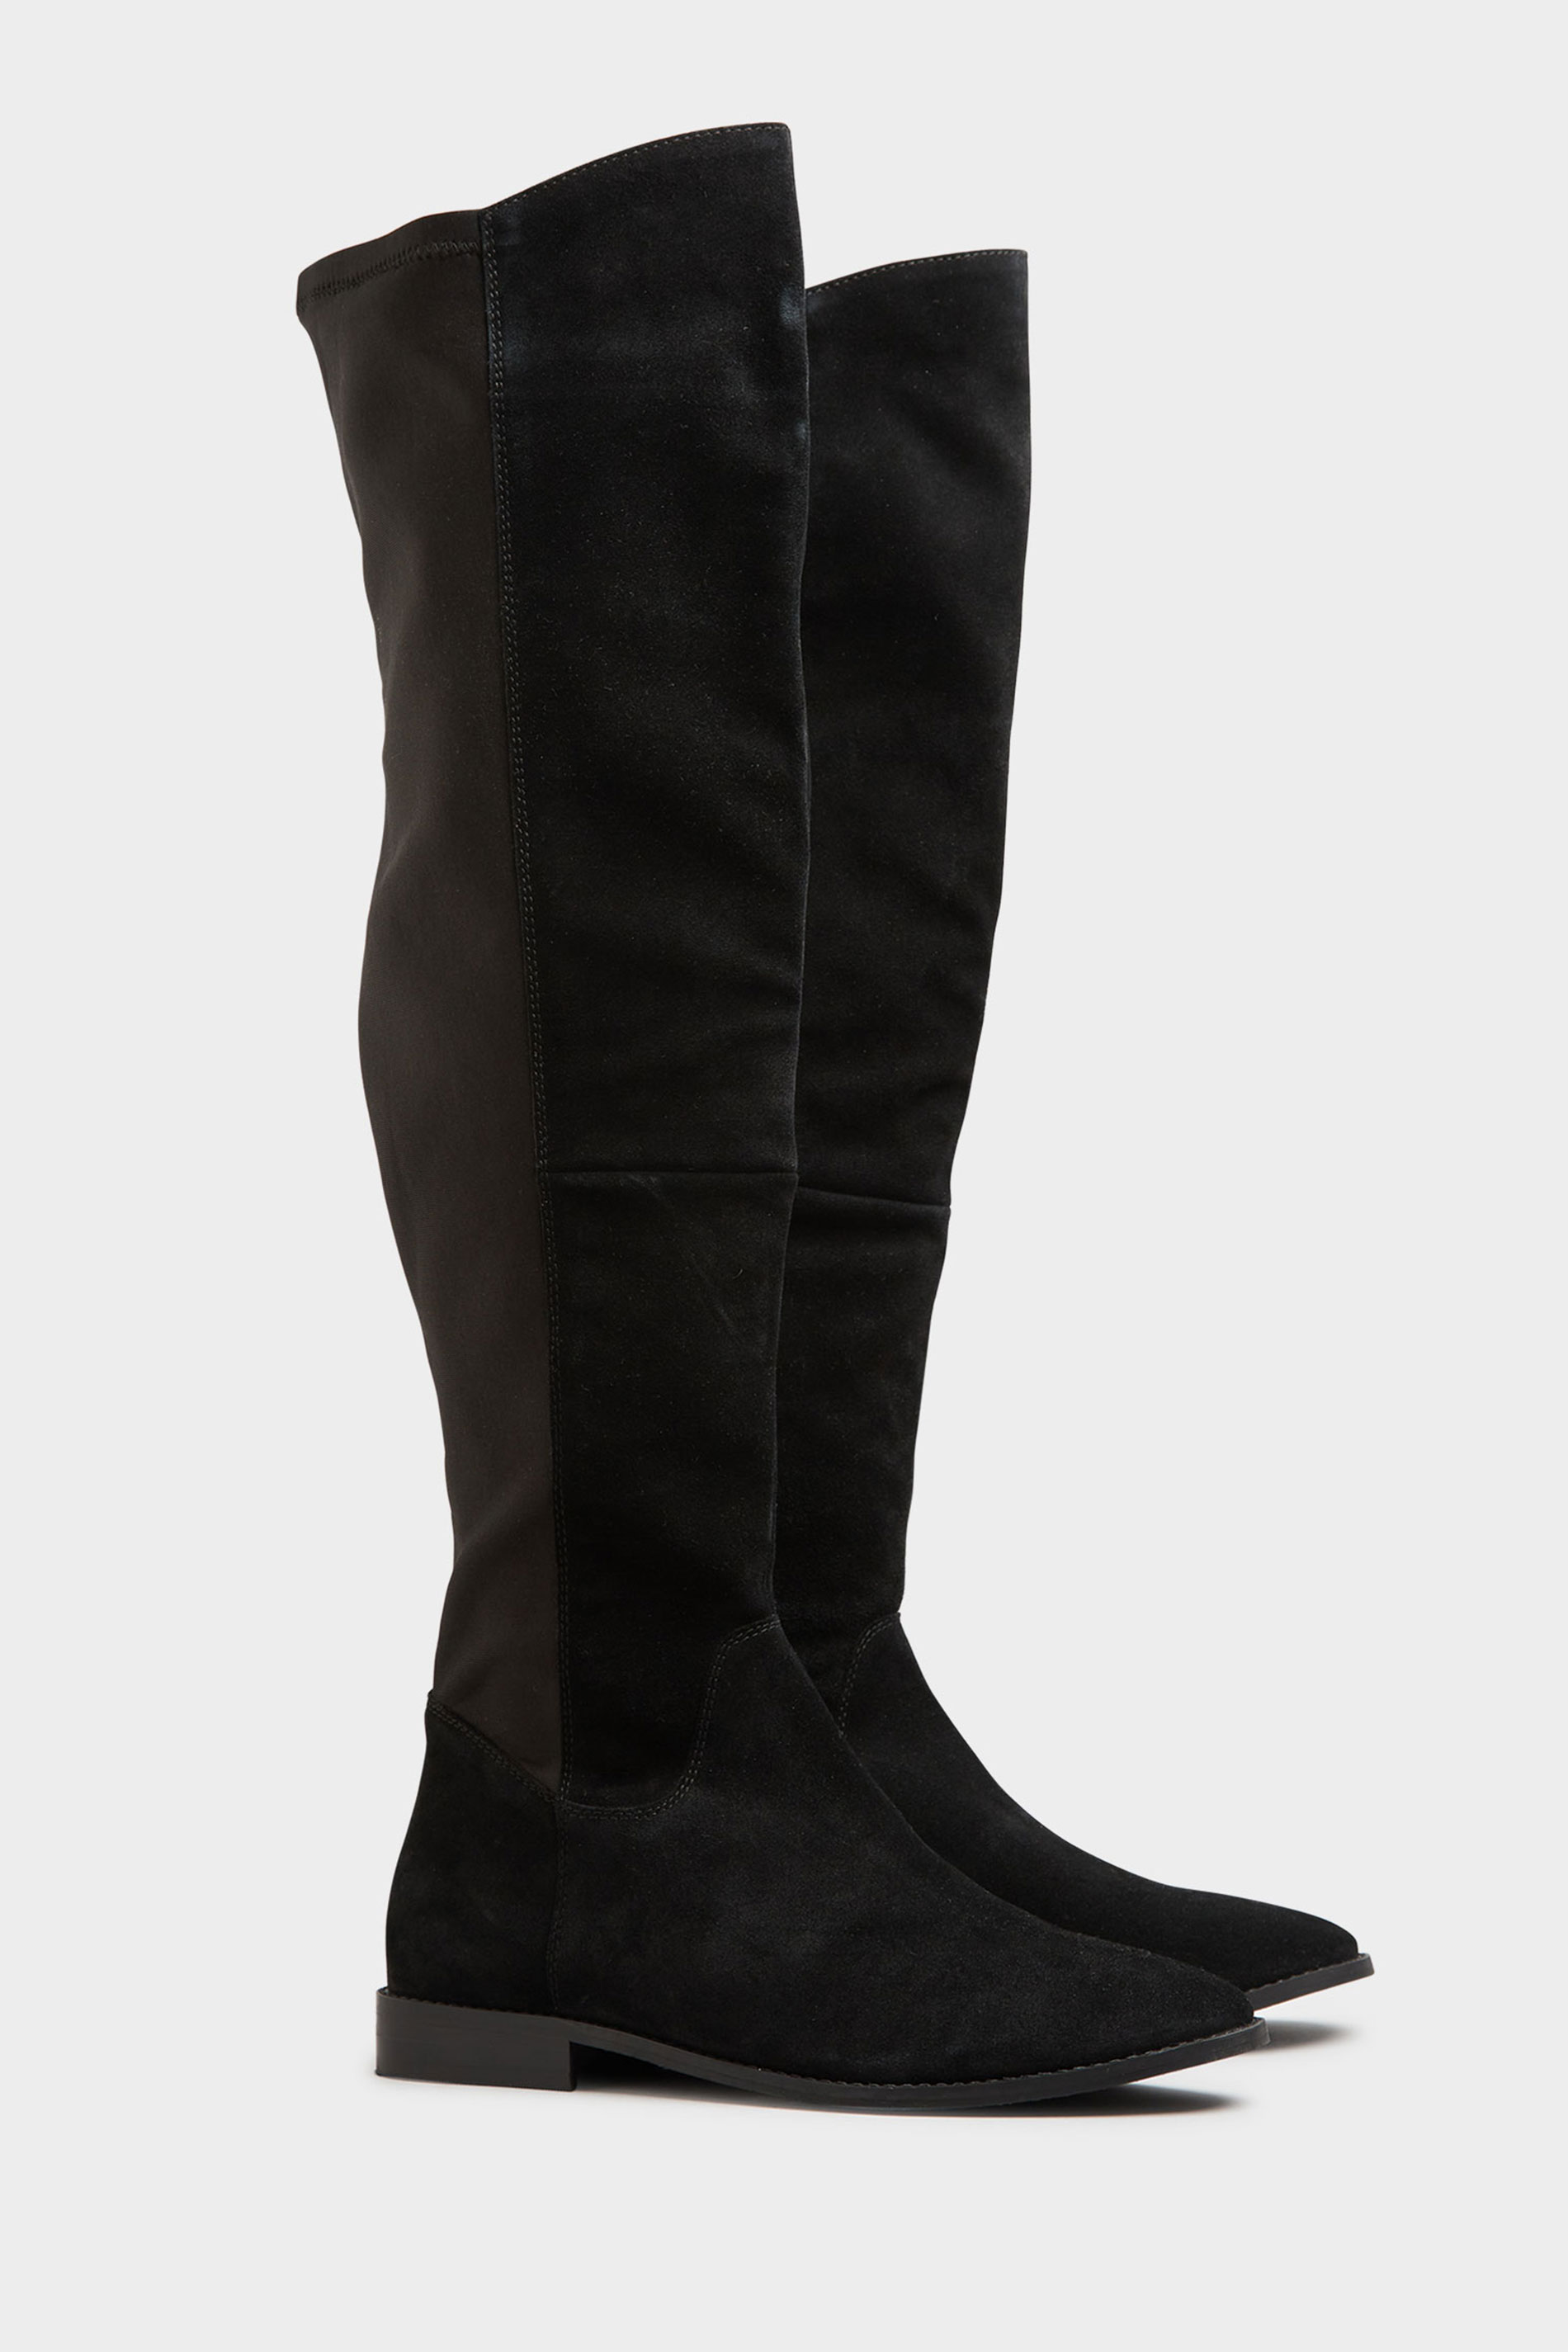 LTS Black Suede Stretch Knee High Boots In Standard D Fit 1